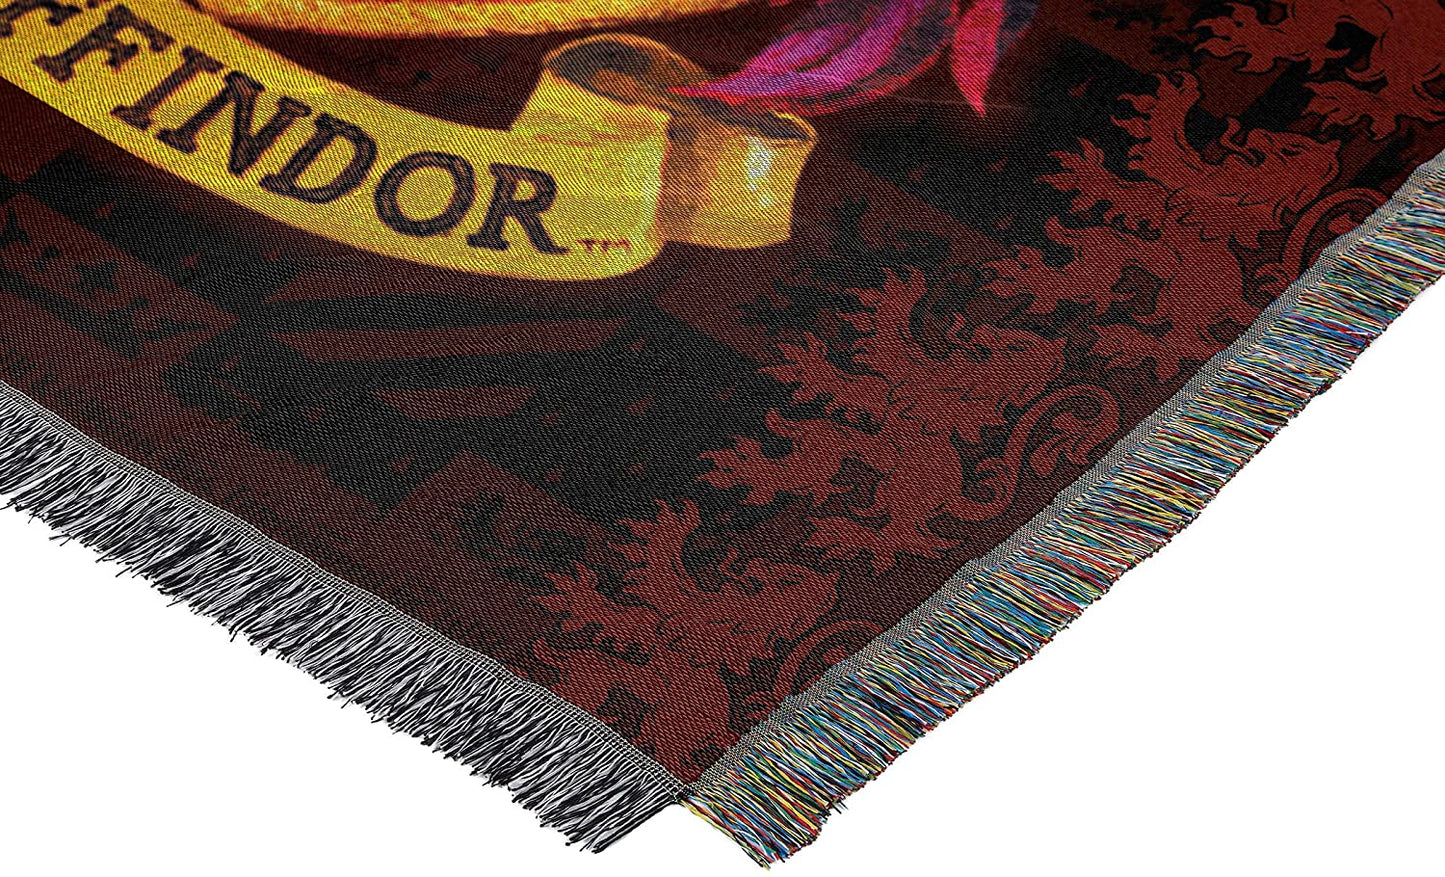 Gryffindor Harry Potter Woven Tapestry Throw Blanket